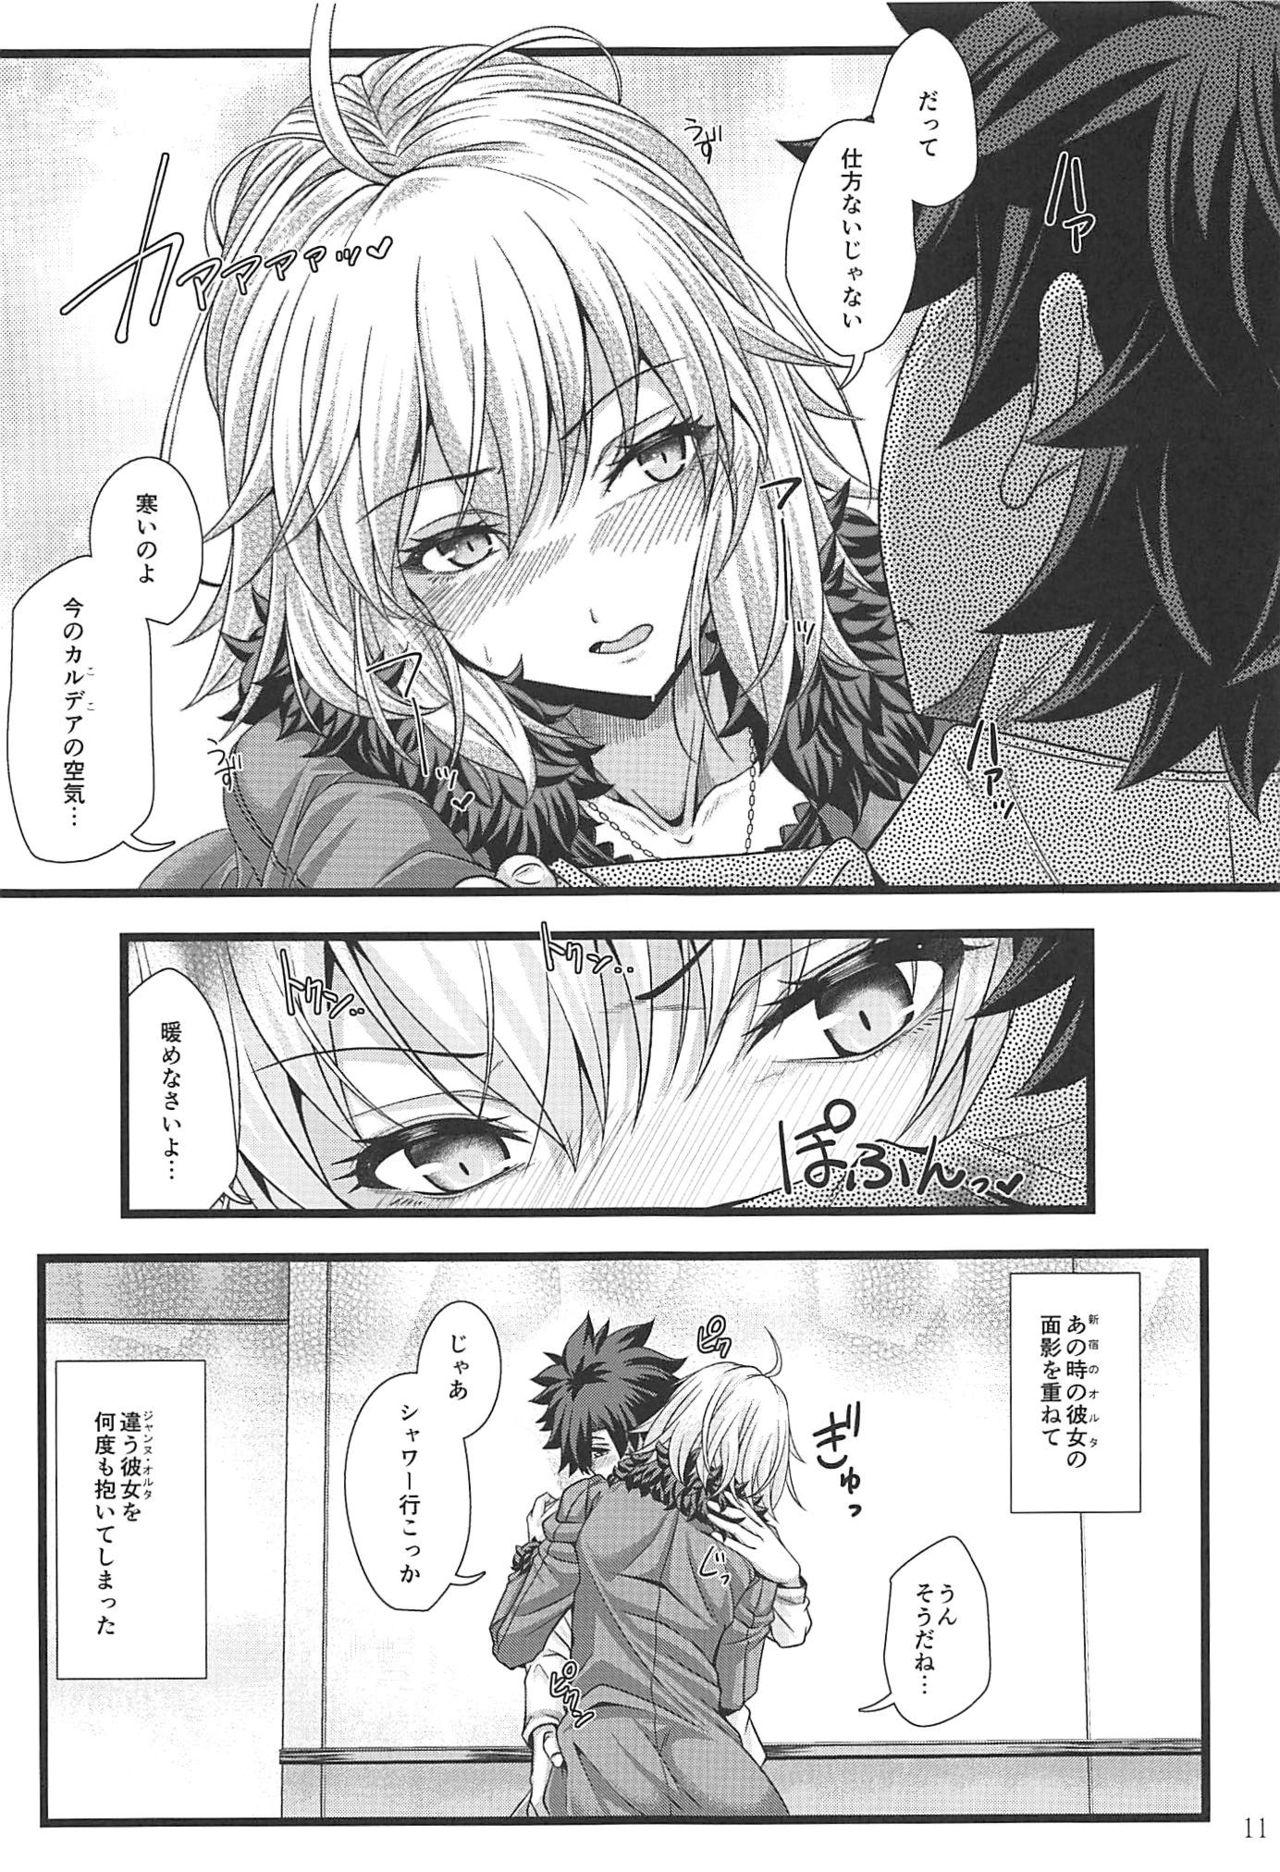 Men ROMANCE - Fate grand order Colombian - Page 10